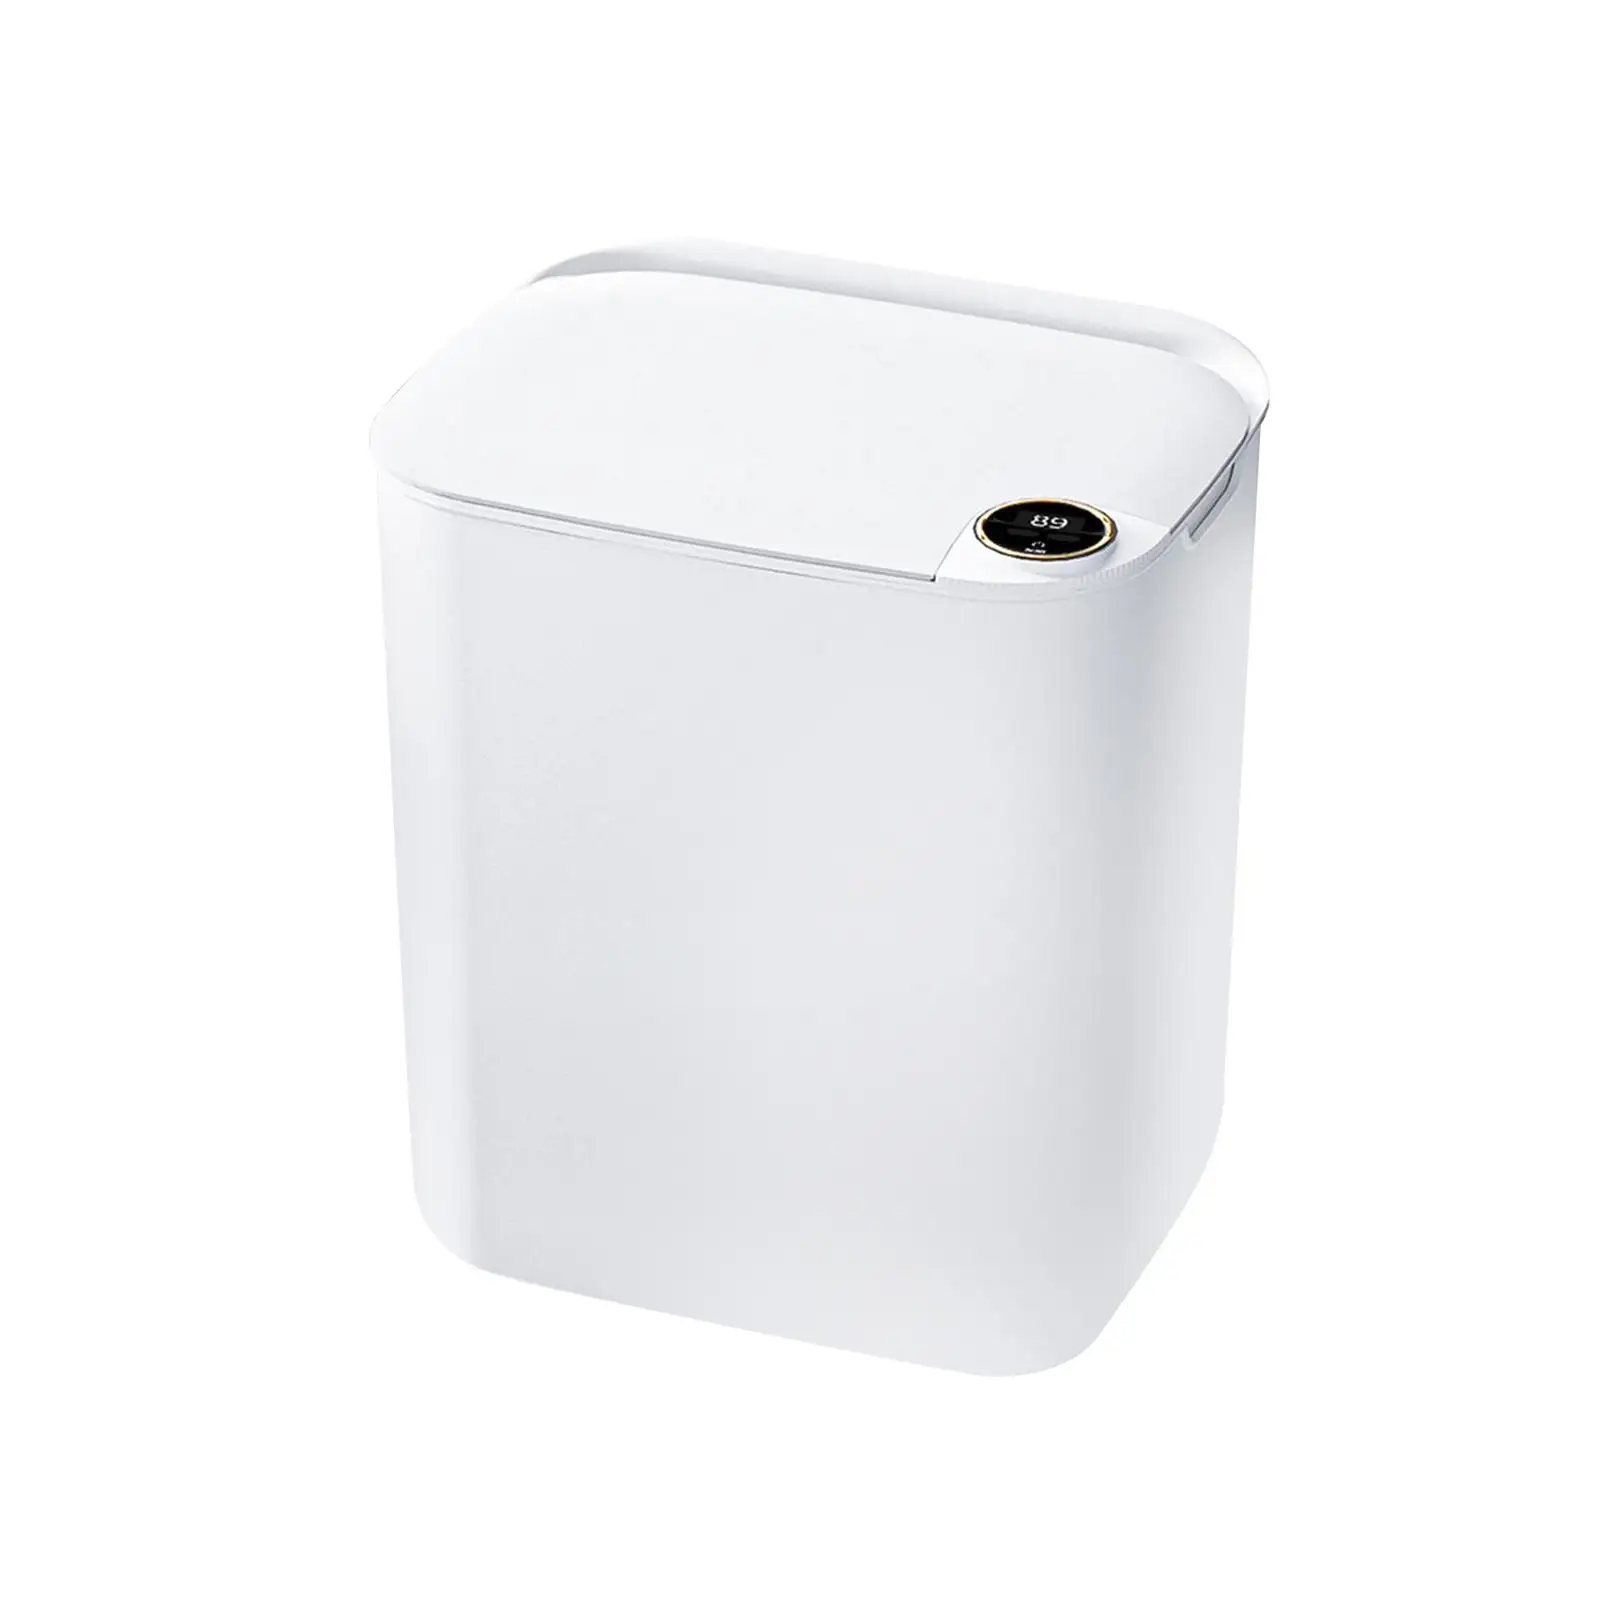 Sensor Trash Can Touchless Smart Induction Garbage Bucket Rubbish Trash Can Waste Bins for Hotel Kitchen Home Toilet Fitments